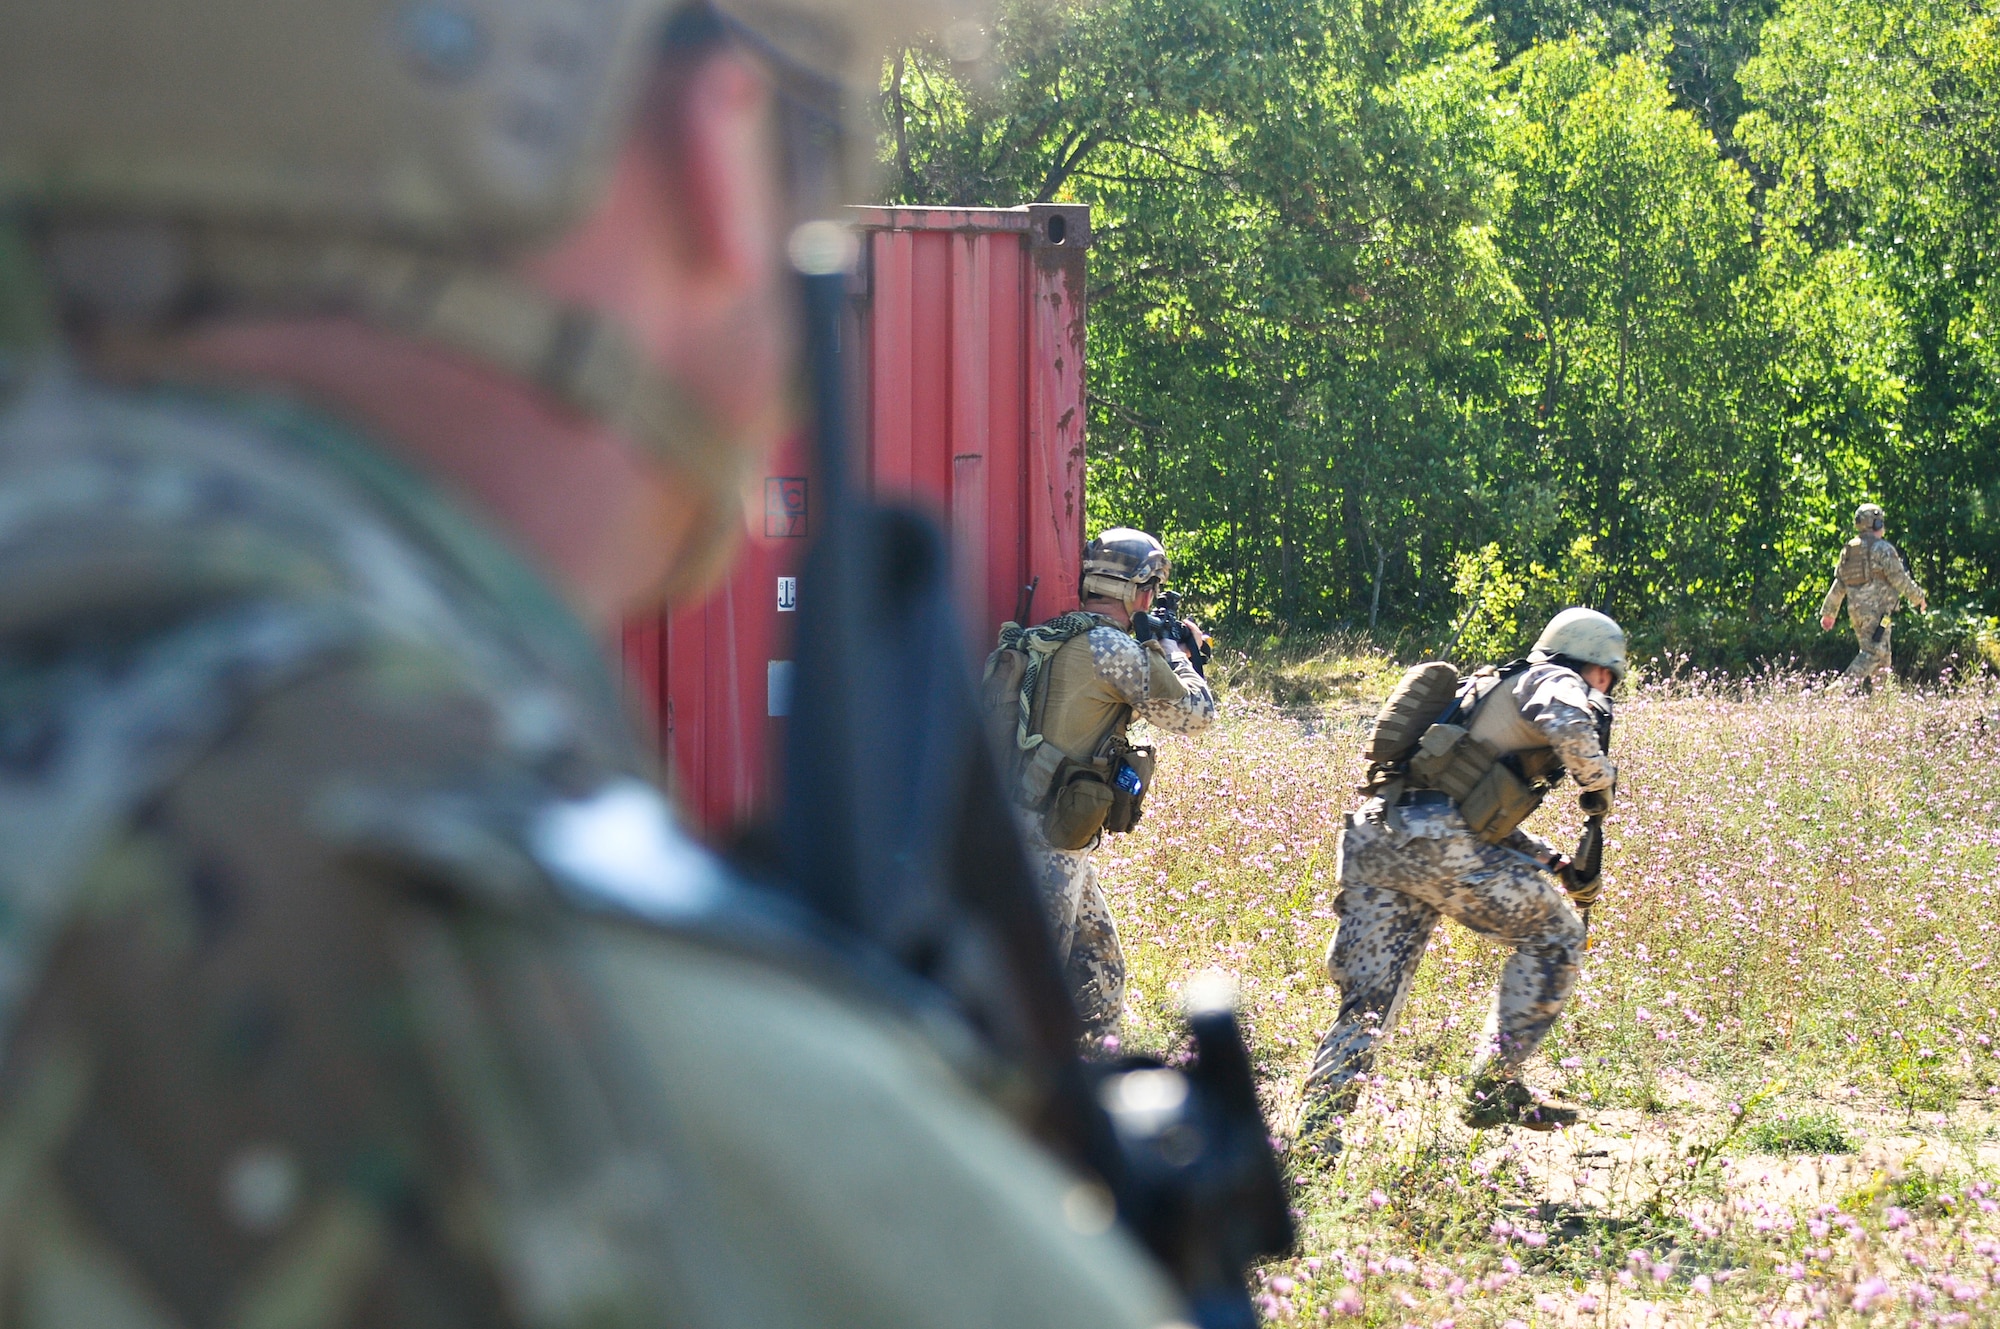 Tactical air control party specialists with the Latvian National Armed Forces advance on enemy forces while a TACP with the 169th Air Support Operations Squadron provides cover fire after an ambush during a reconnaissance mission at Operation Northern Strike in Grayling Air Gunnery Range, Grayling, Mich., Aug. 14, 2014. Northern Strike was a 3-week-long exercise led by the National Guard that demonstrated the combined power of joint and multinational air and ground forces. (U.S. Air National Guard photo by Staff Sgt. Lealan Buehrer)